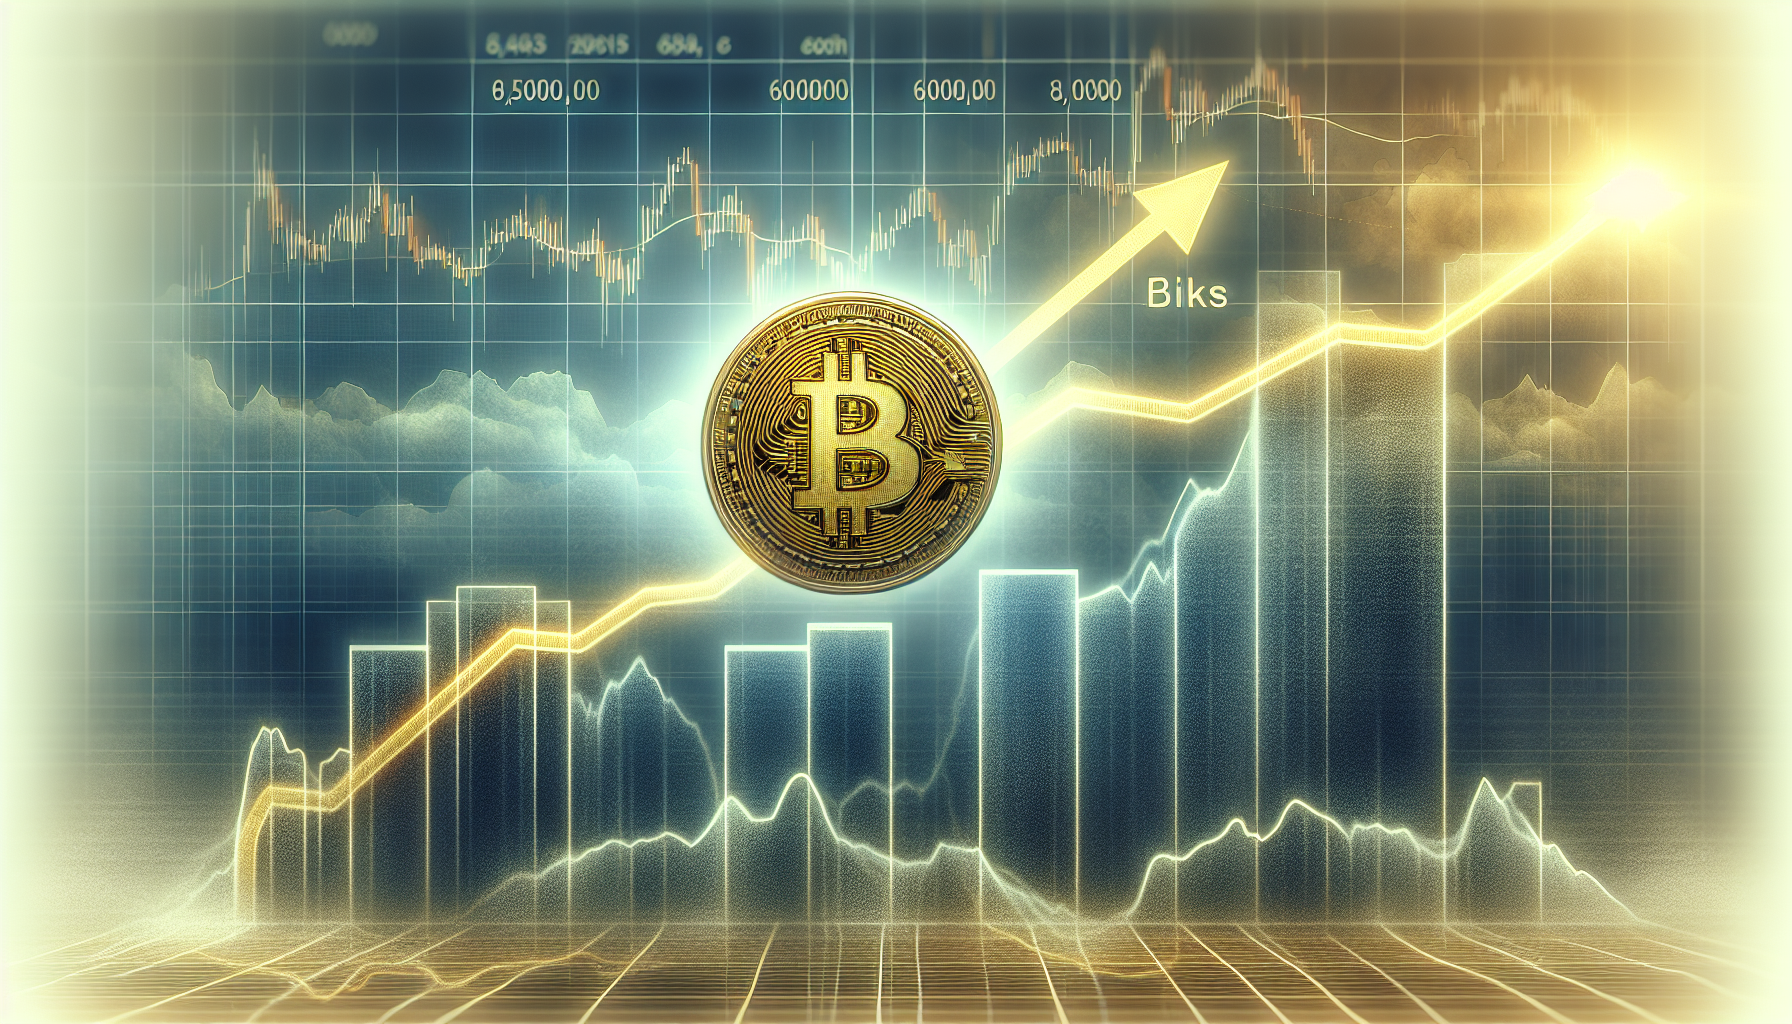 Bitcoin's price resilience amid PCE index highs and underlying support at 60k